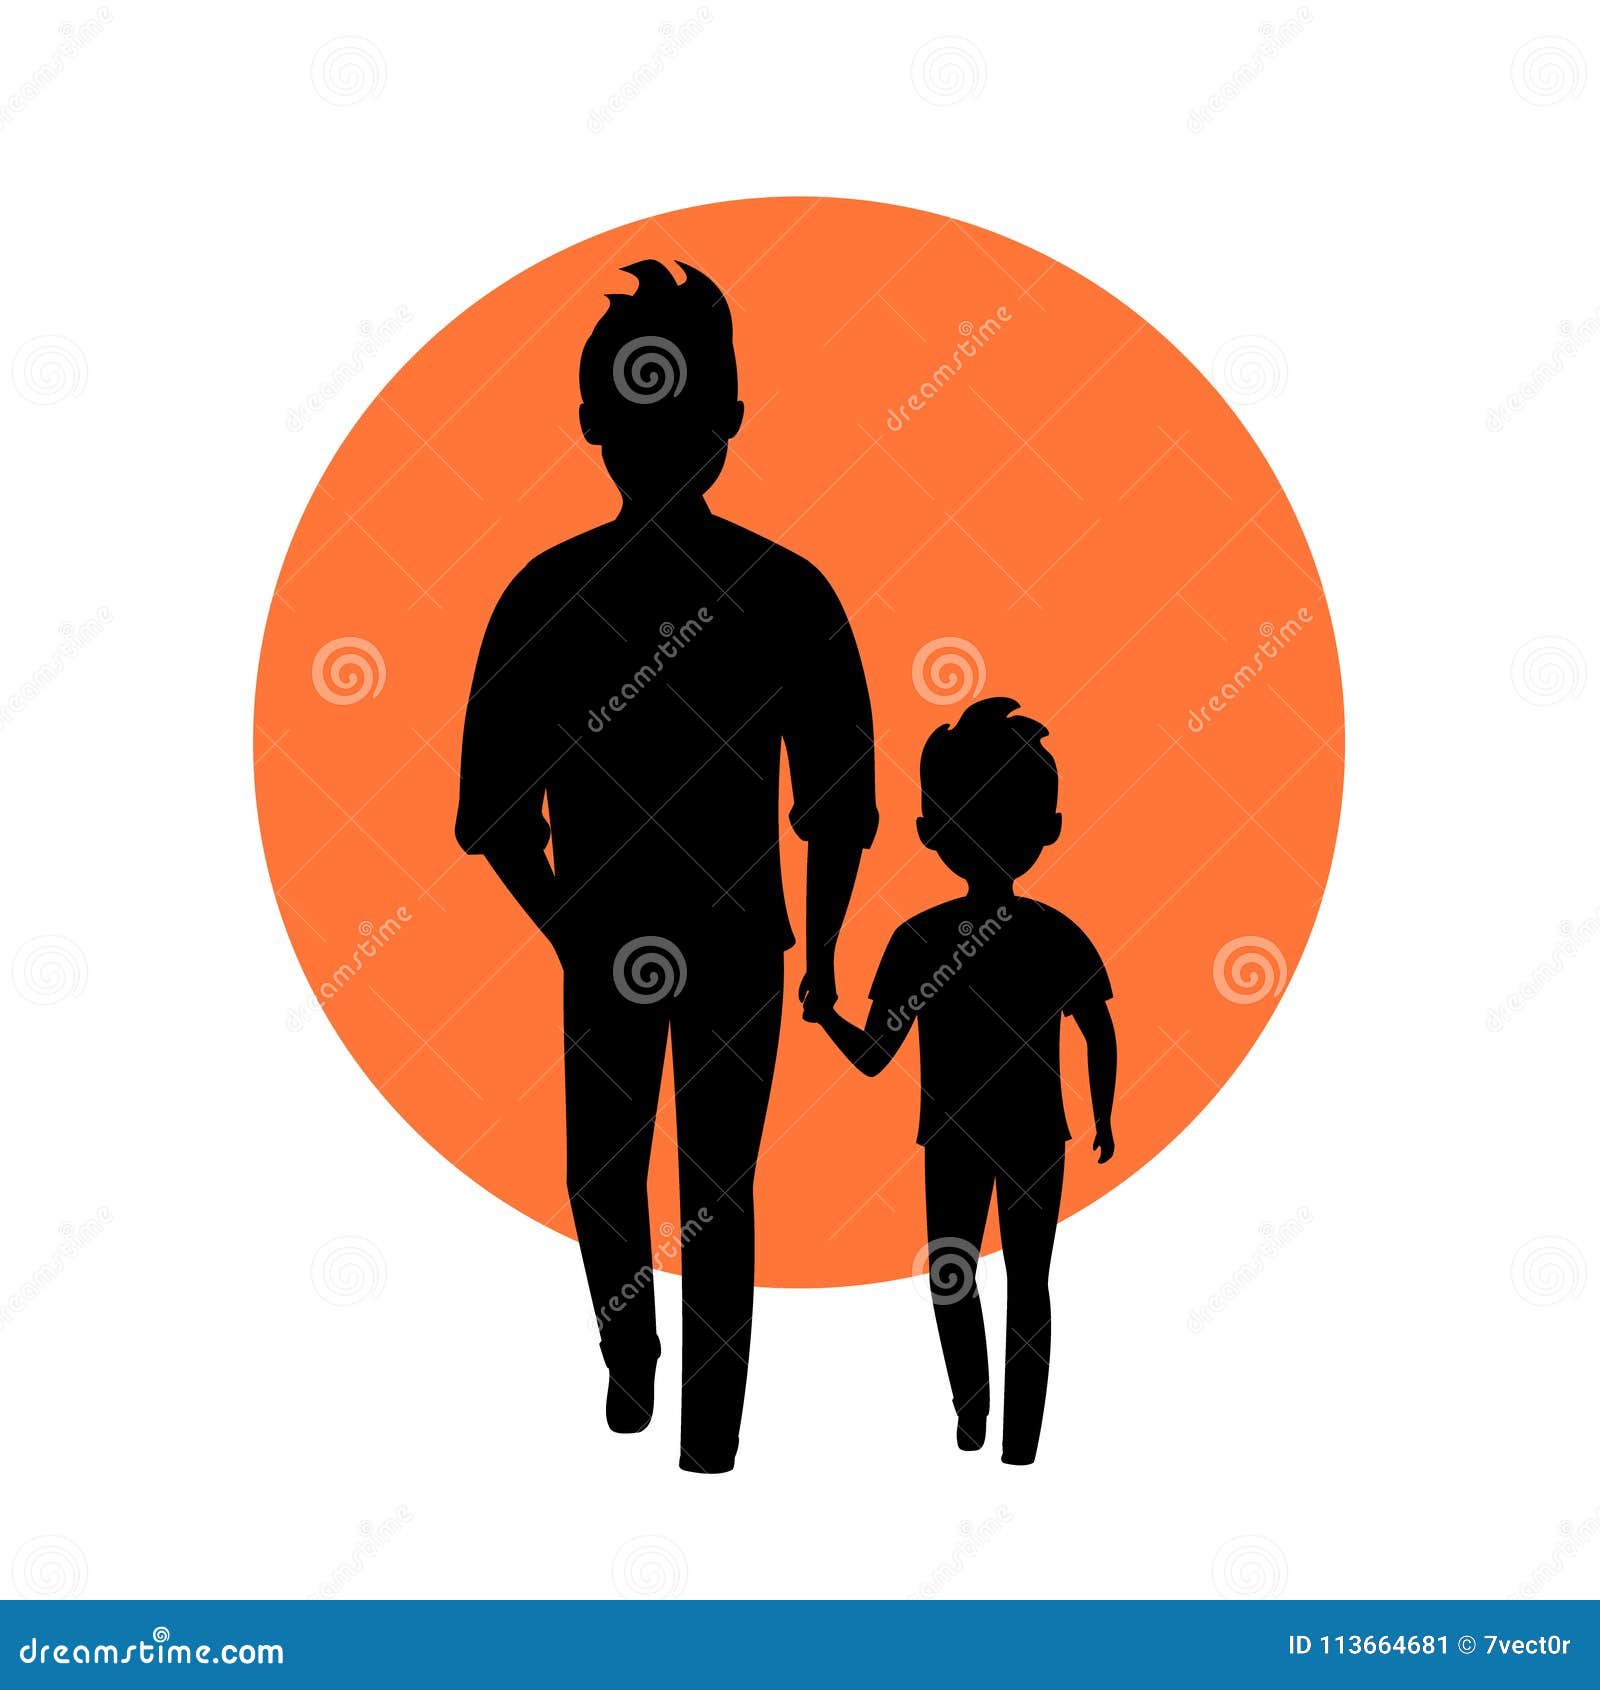 Fathers Day Silhouette PNG Hd Transparent Image And Clipart Image For Free  Download - Lovepik | 401393434